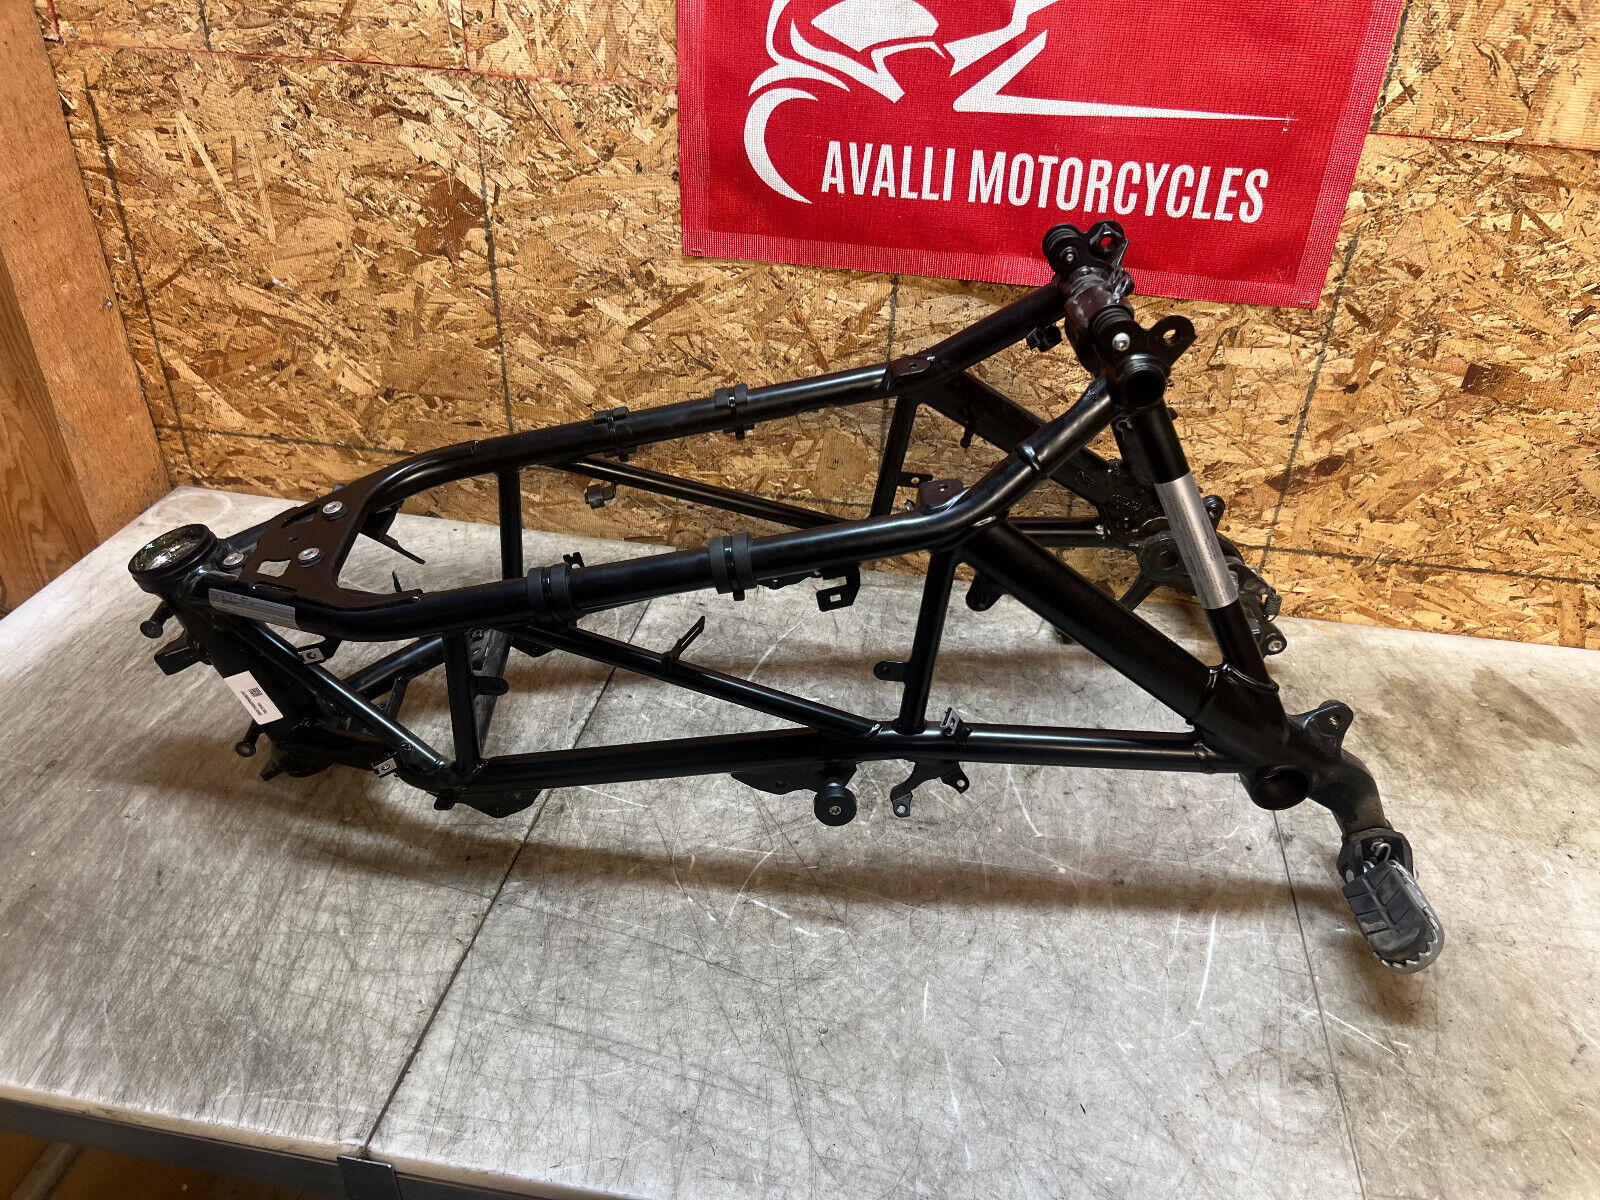 22 23 2022 2023 KTM SUPER ADVENTURE 1290 S MAIN FRAME CHASSIS